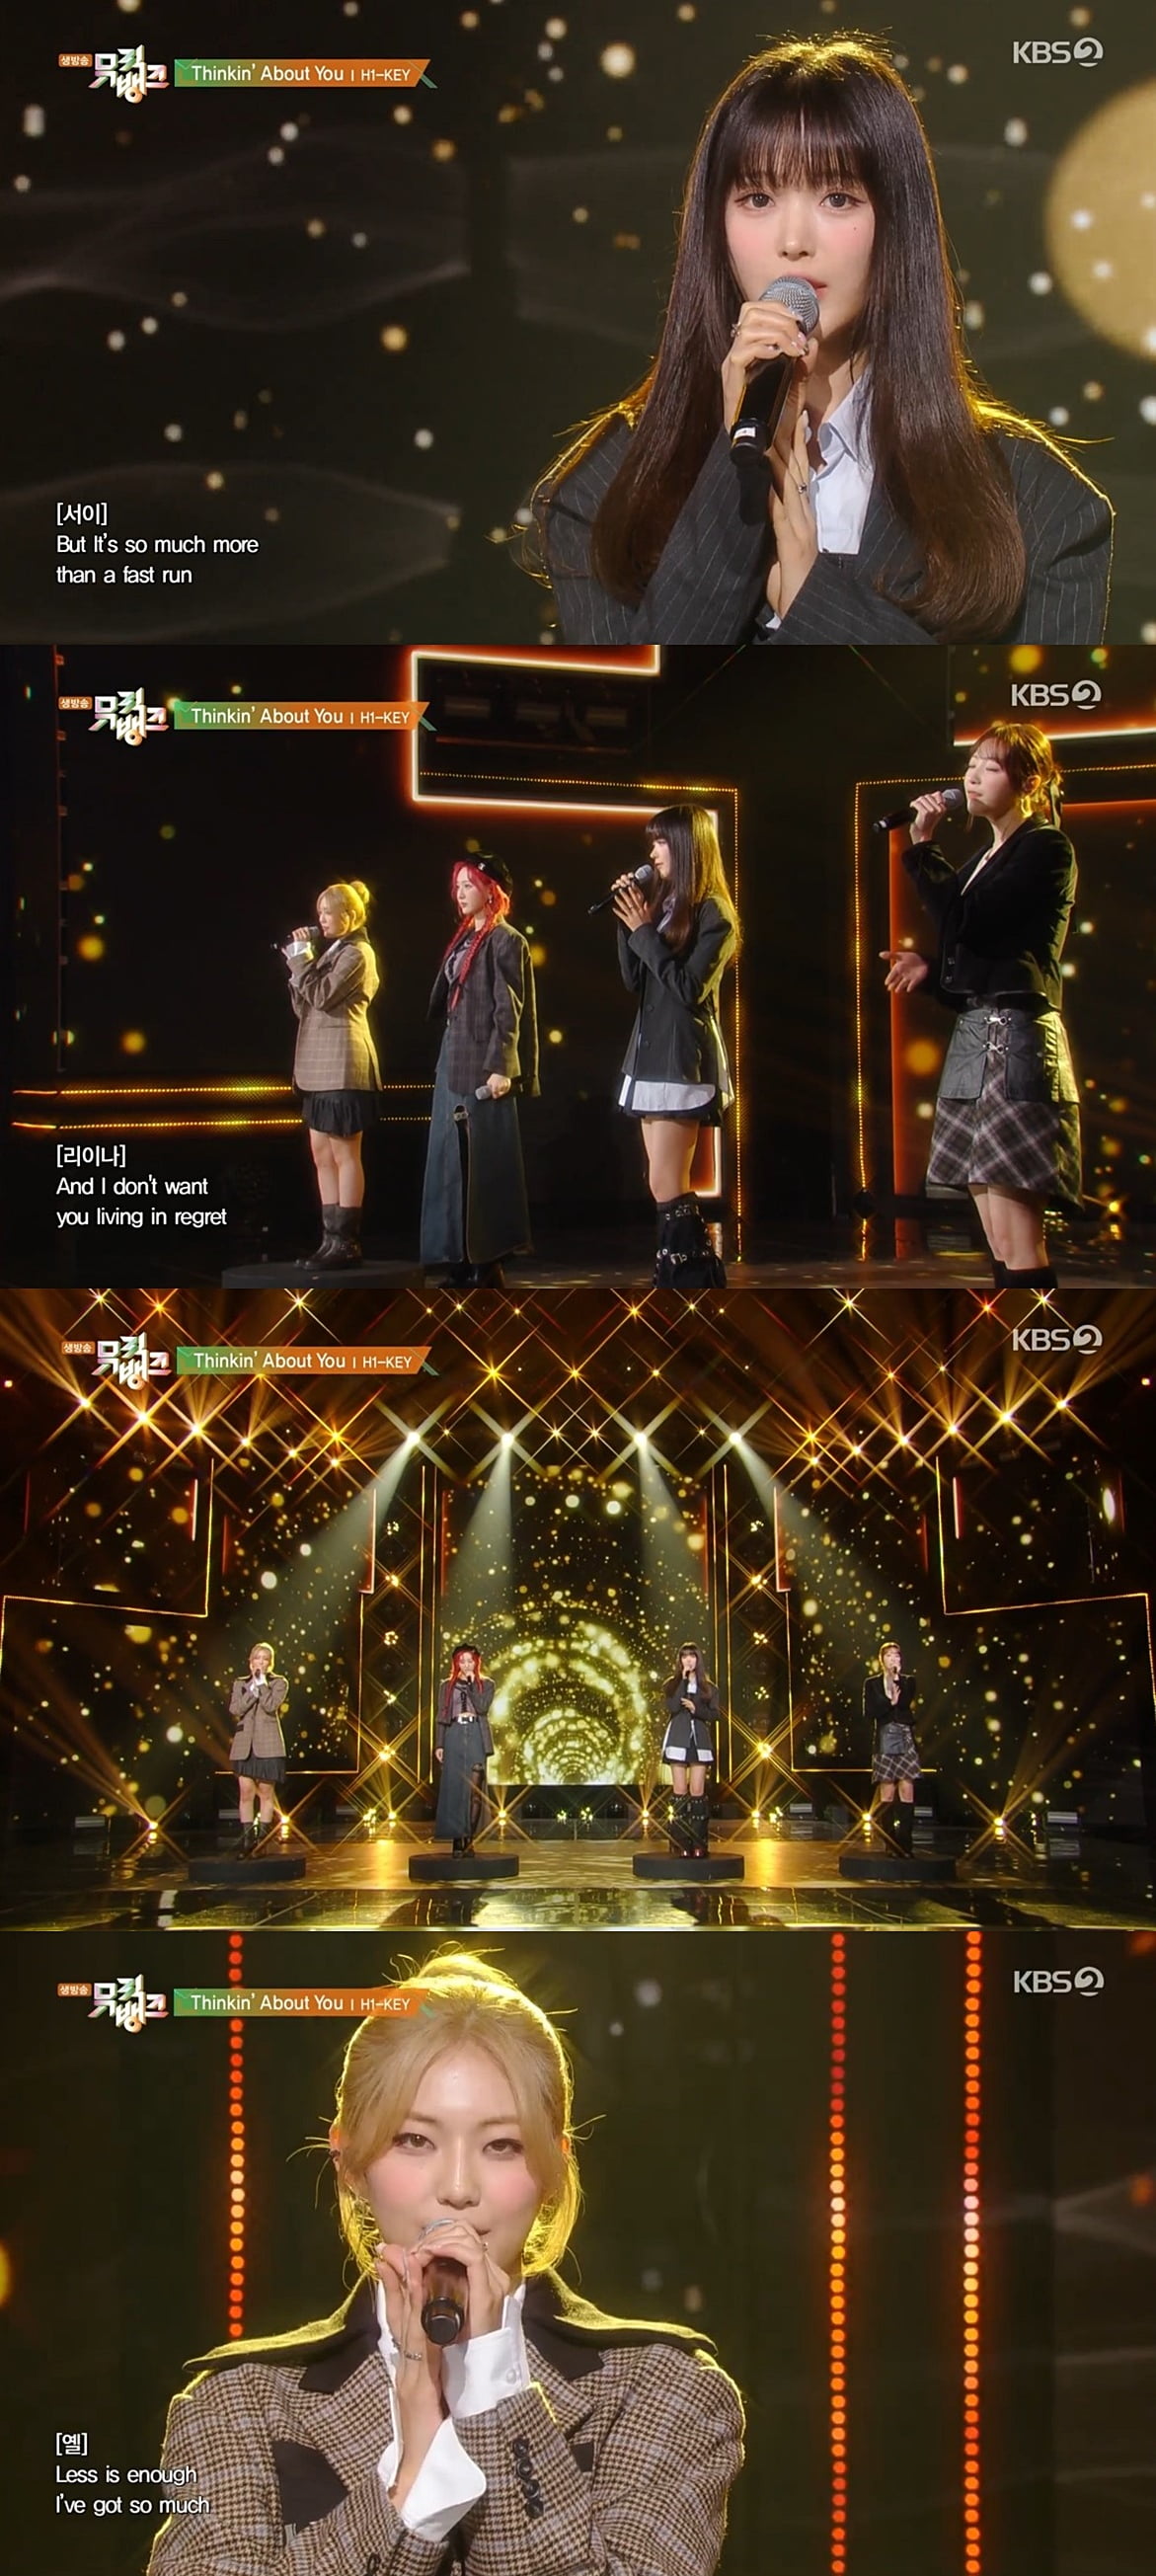 Hi-Key ripped ‘Music Bank’… Emotional build-up → 4-color chord explosion